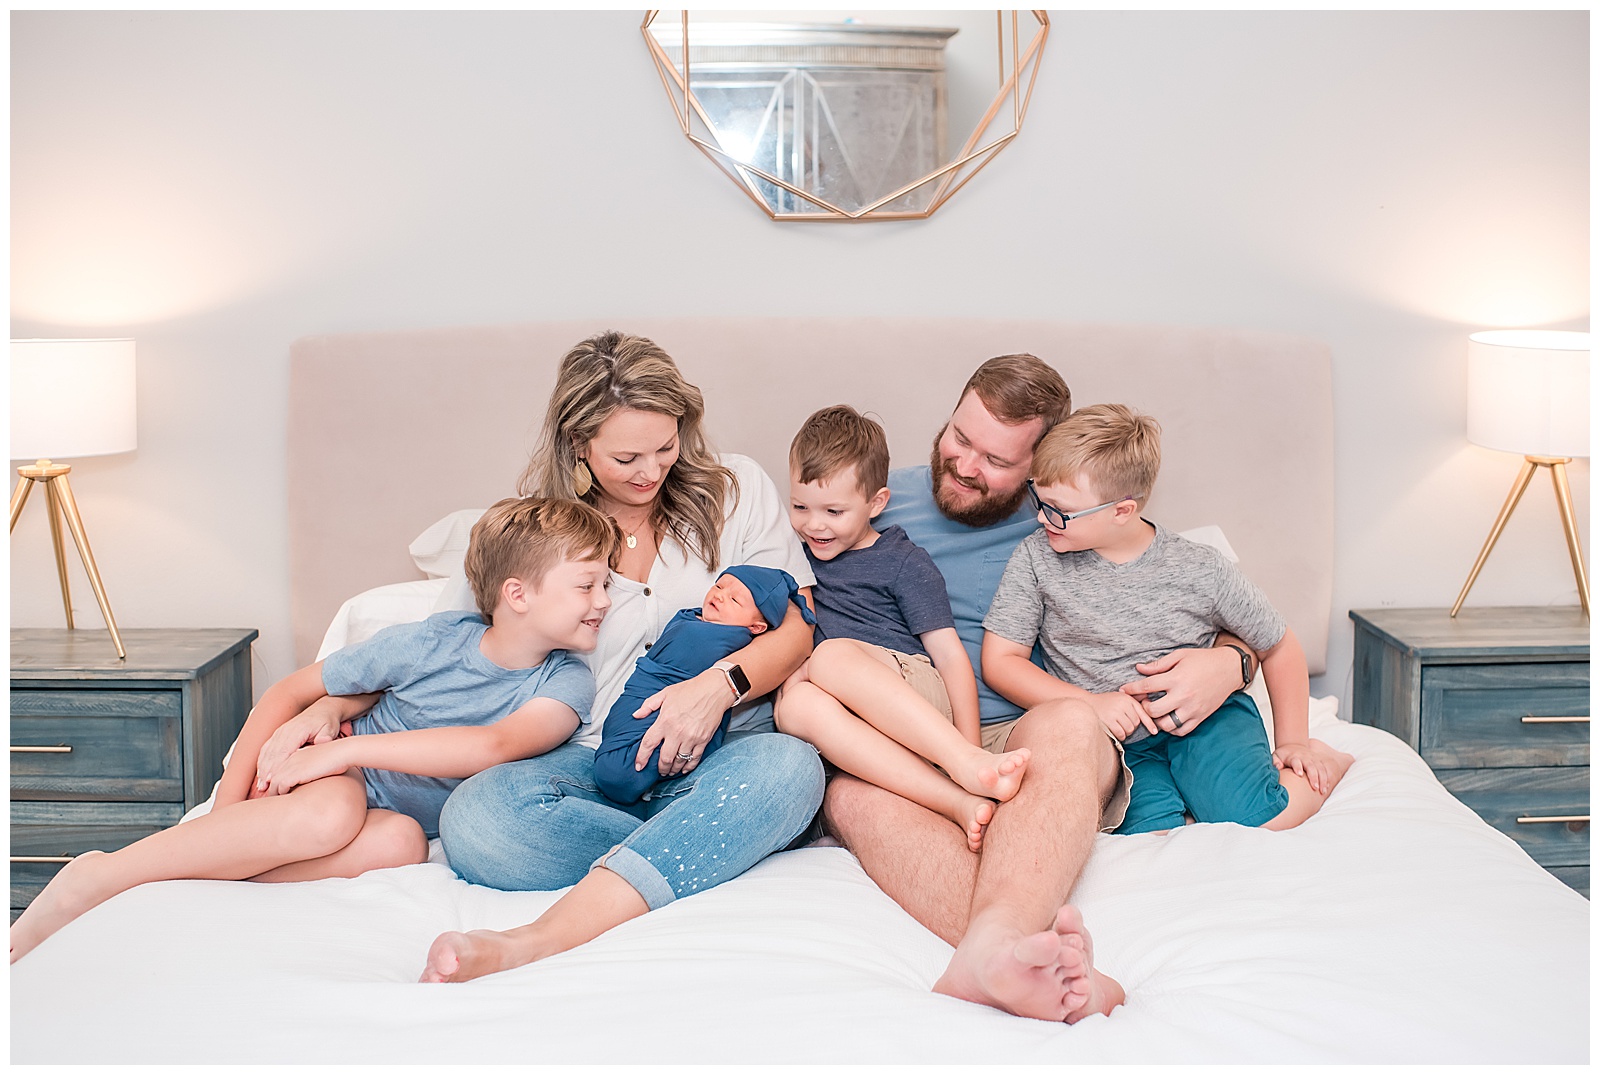 Newborn and Family lifestyle photography in The Woodlands, Texas